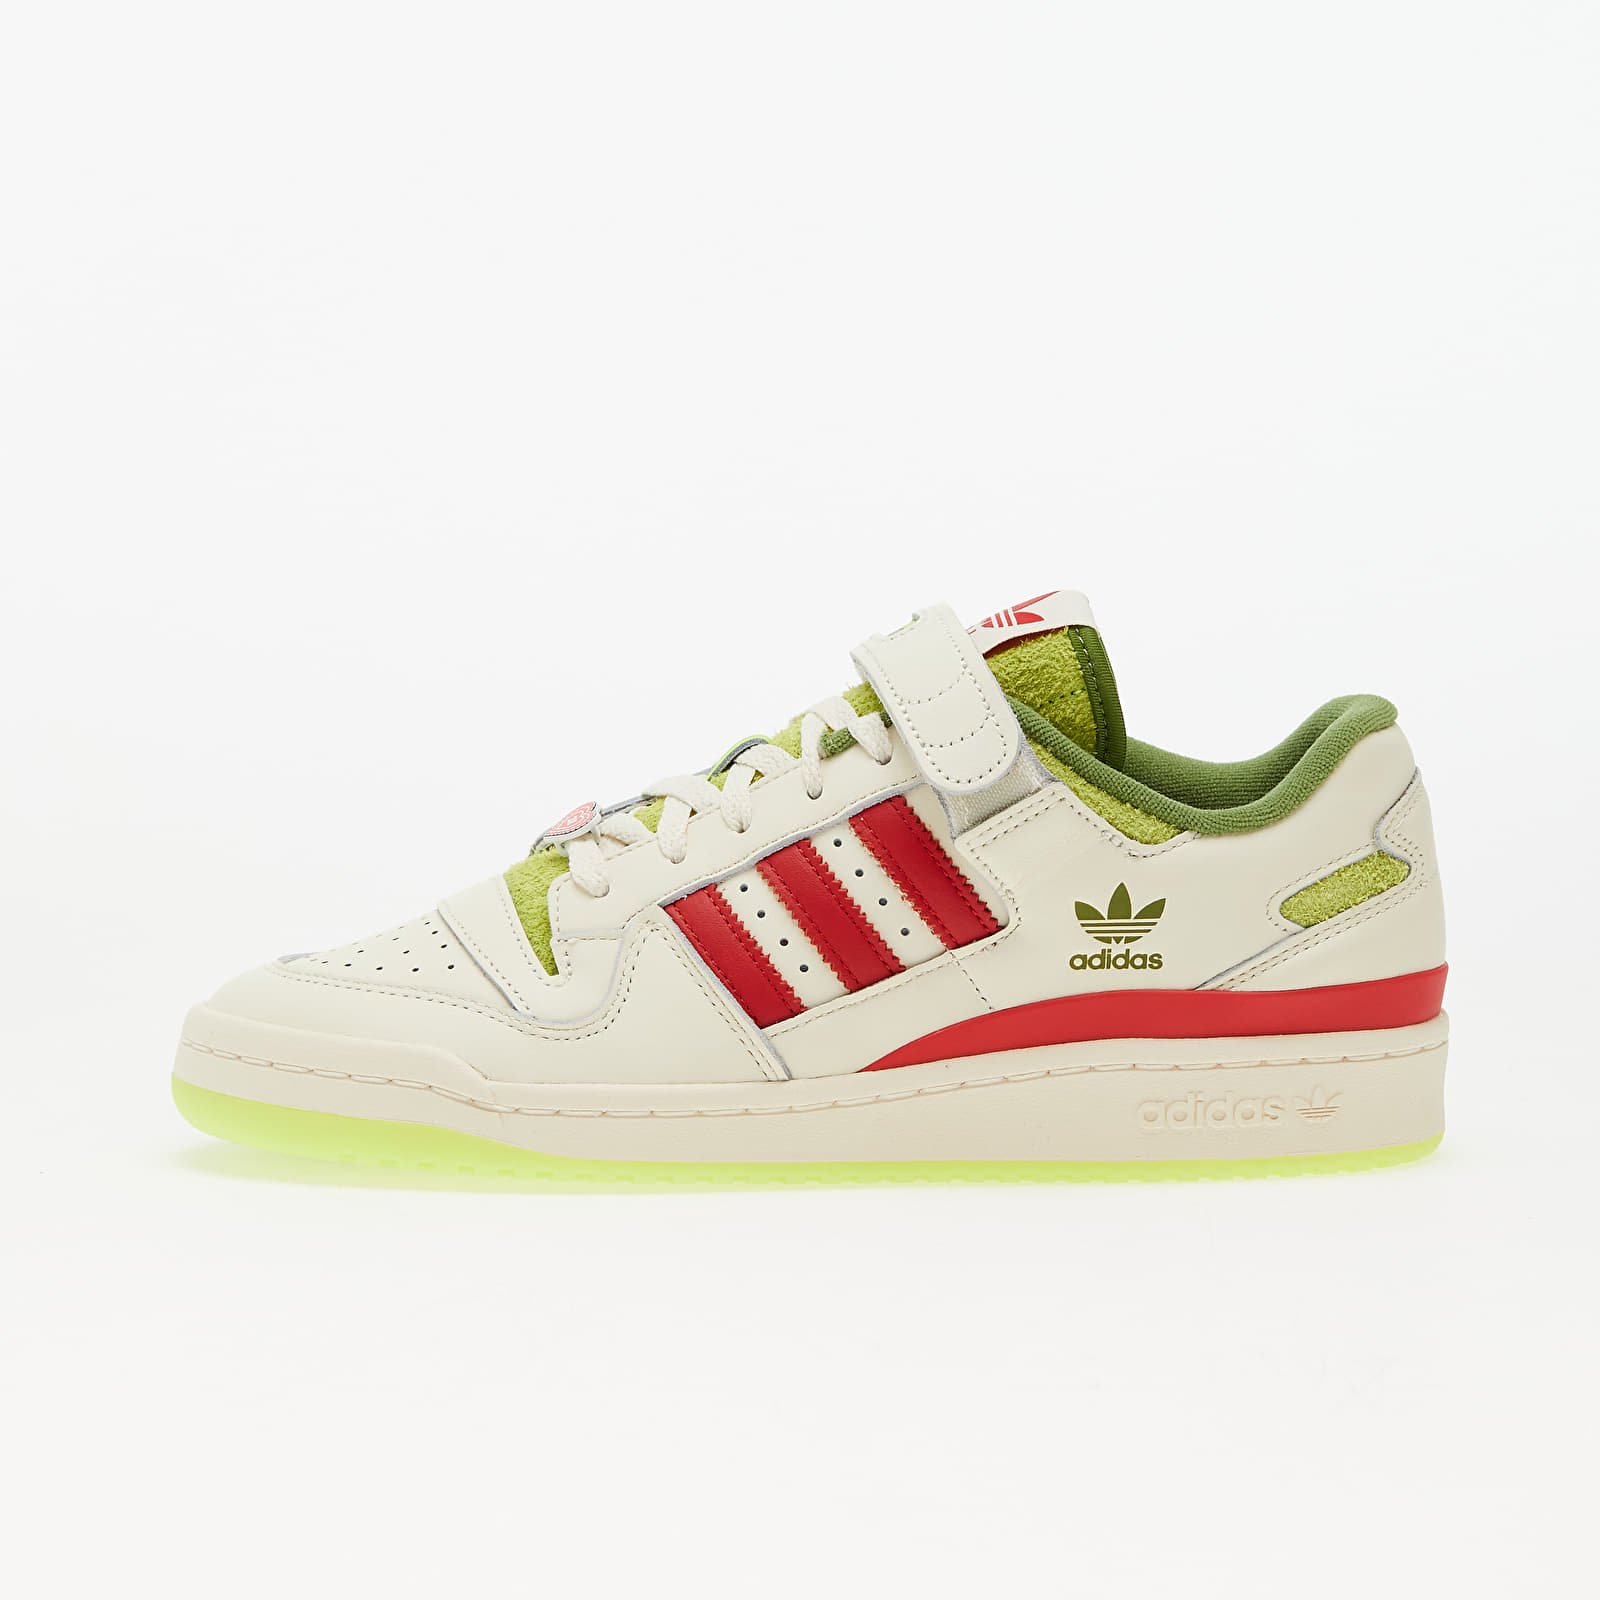 Buty męskie adidas x The Grinch Forum Low Core White/ Collegiate Red/ Solar Slime